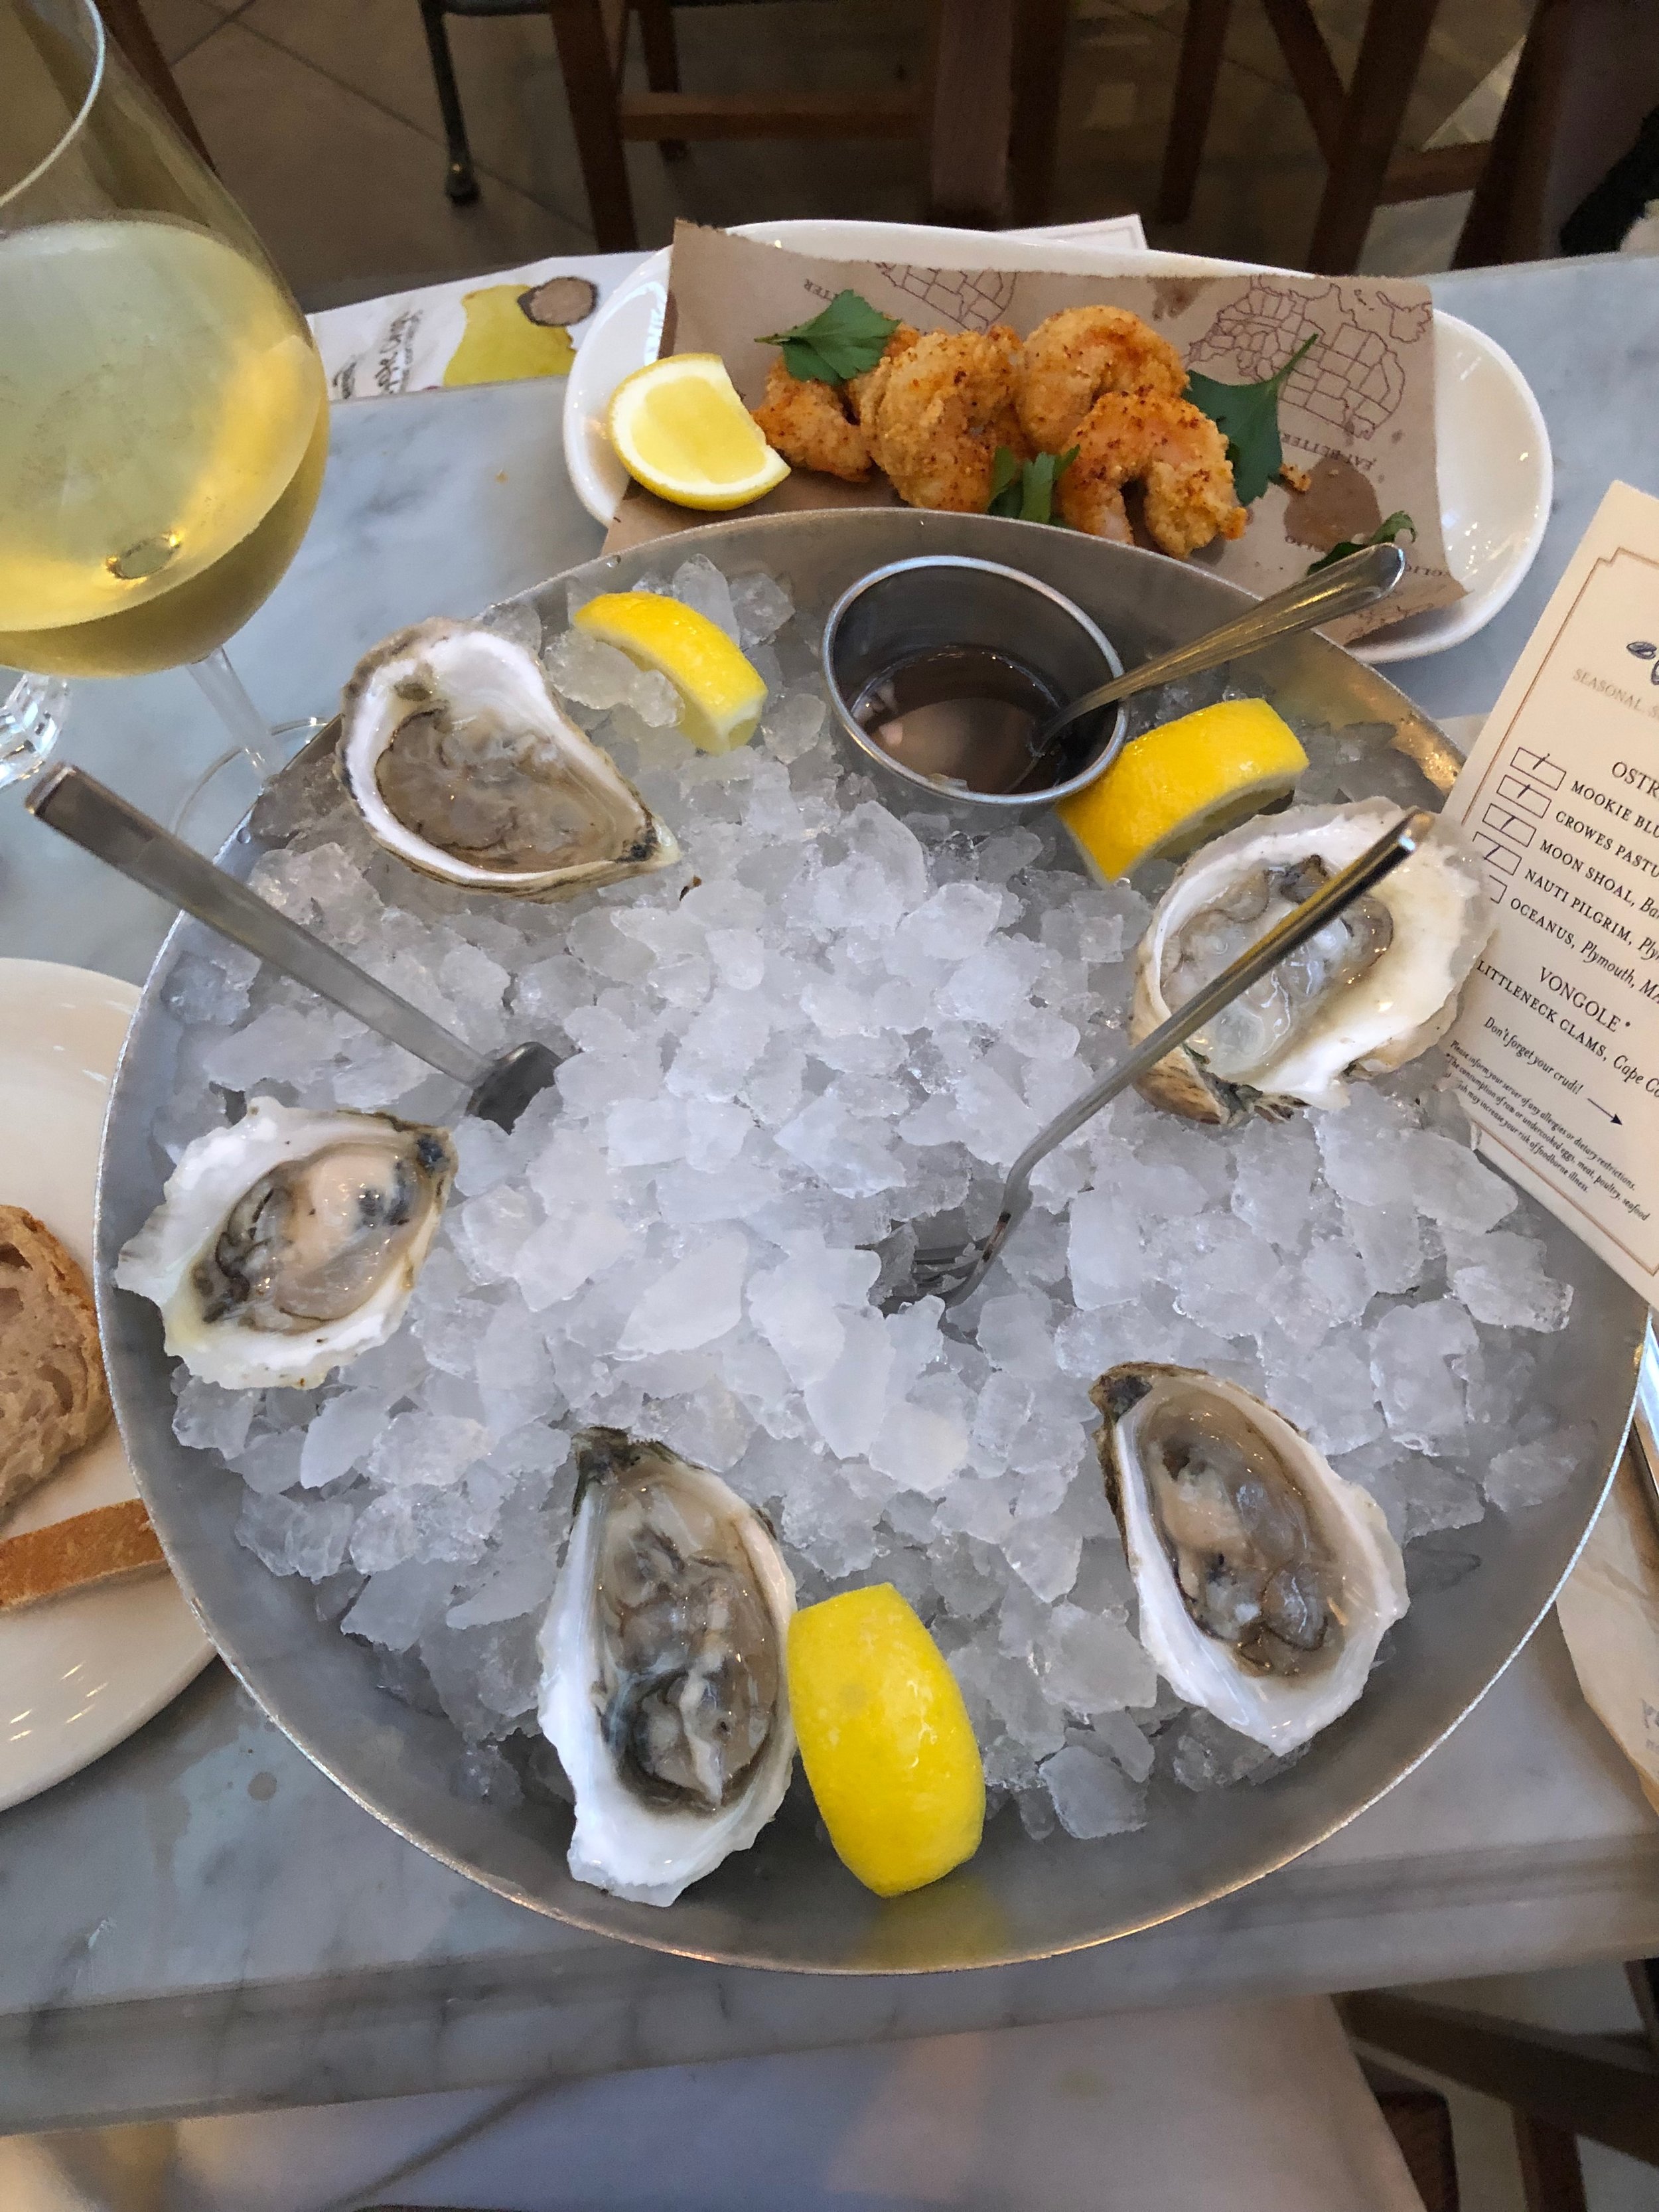 A sampling of local oysters from the fresh seafood bar